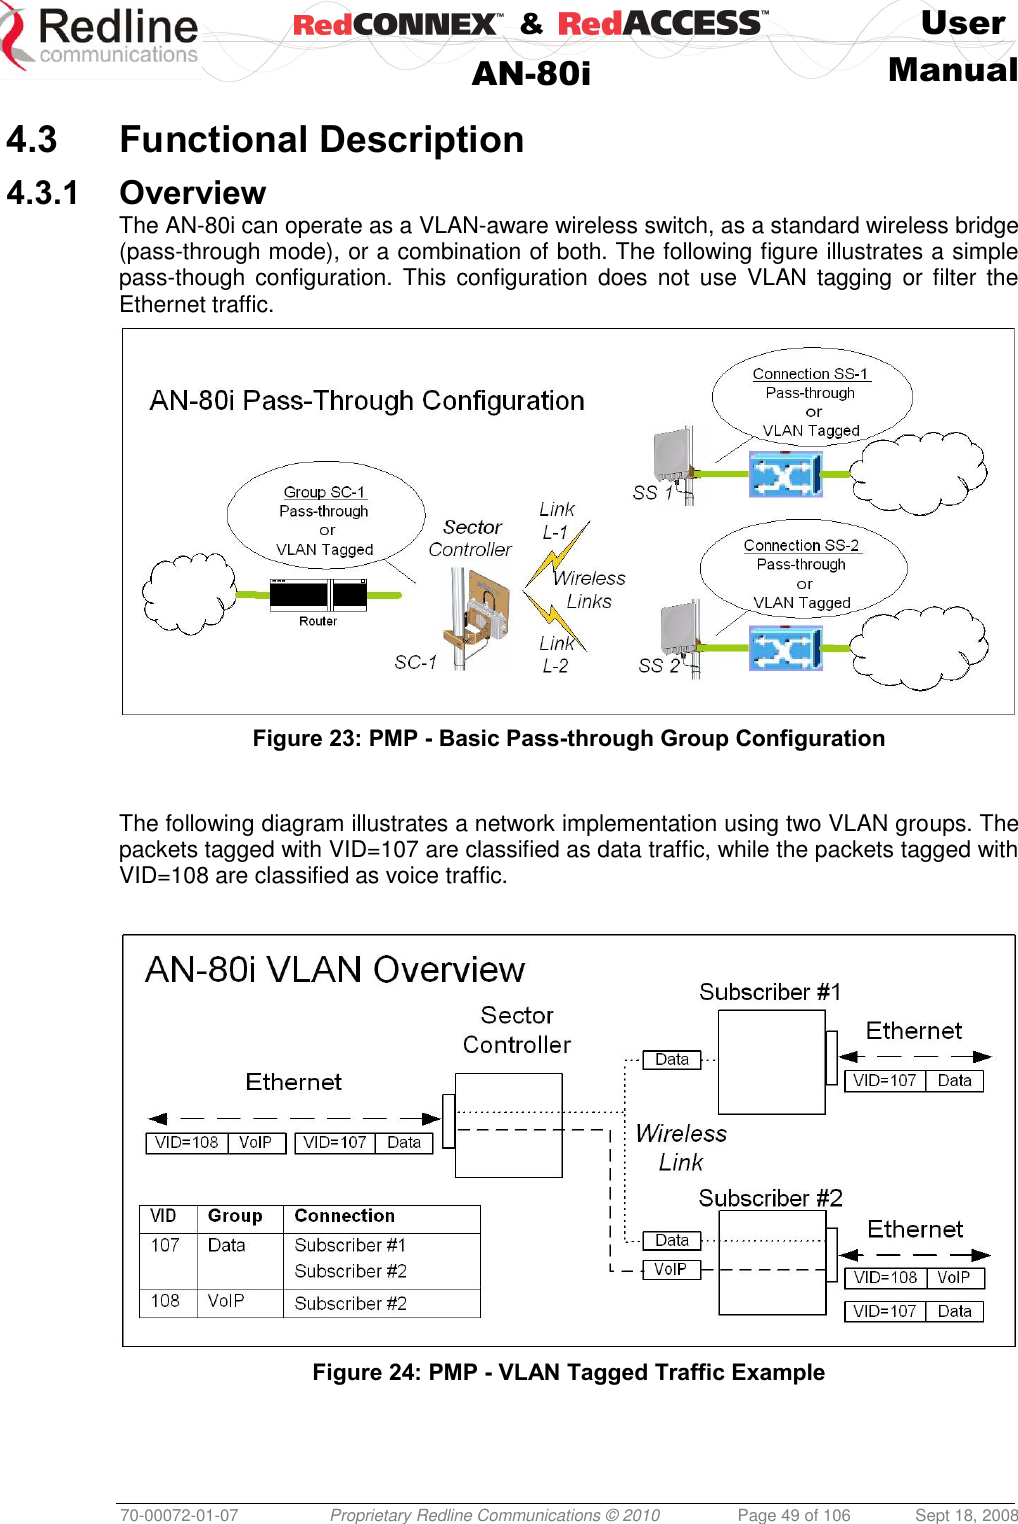    &amp;  User  AN-80i Manual  70-00072-01-07 Proprietary Redline Communications © 2010  Page 49 of 106  Sept 18, 2008  4.3 Functional Description 4.3.1 Overview The AN-80i can operate as a VLAN-aware wireless switch, as a standard wireless bridge (pass-through mode), or a combination of both. The following figure illustrates a simple pass-though configuration. This  configuration  does not  use  VLAN  tagging  or filter  the Ethernet traffic.  Figure 23: PMP - Basic Pass-through Group Configuration   The following diagram illustrates a network implementation using two VLAN groups. The packets tagged with VID=107 are classified as data traffic, while the packets tagged with VID=108 are classified as voice traffic.    Figure 24: PMP - VLAN Tagged Traffic Example   